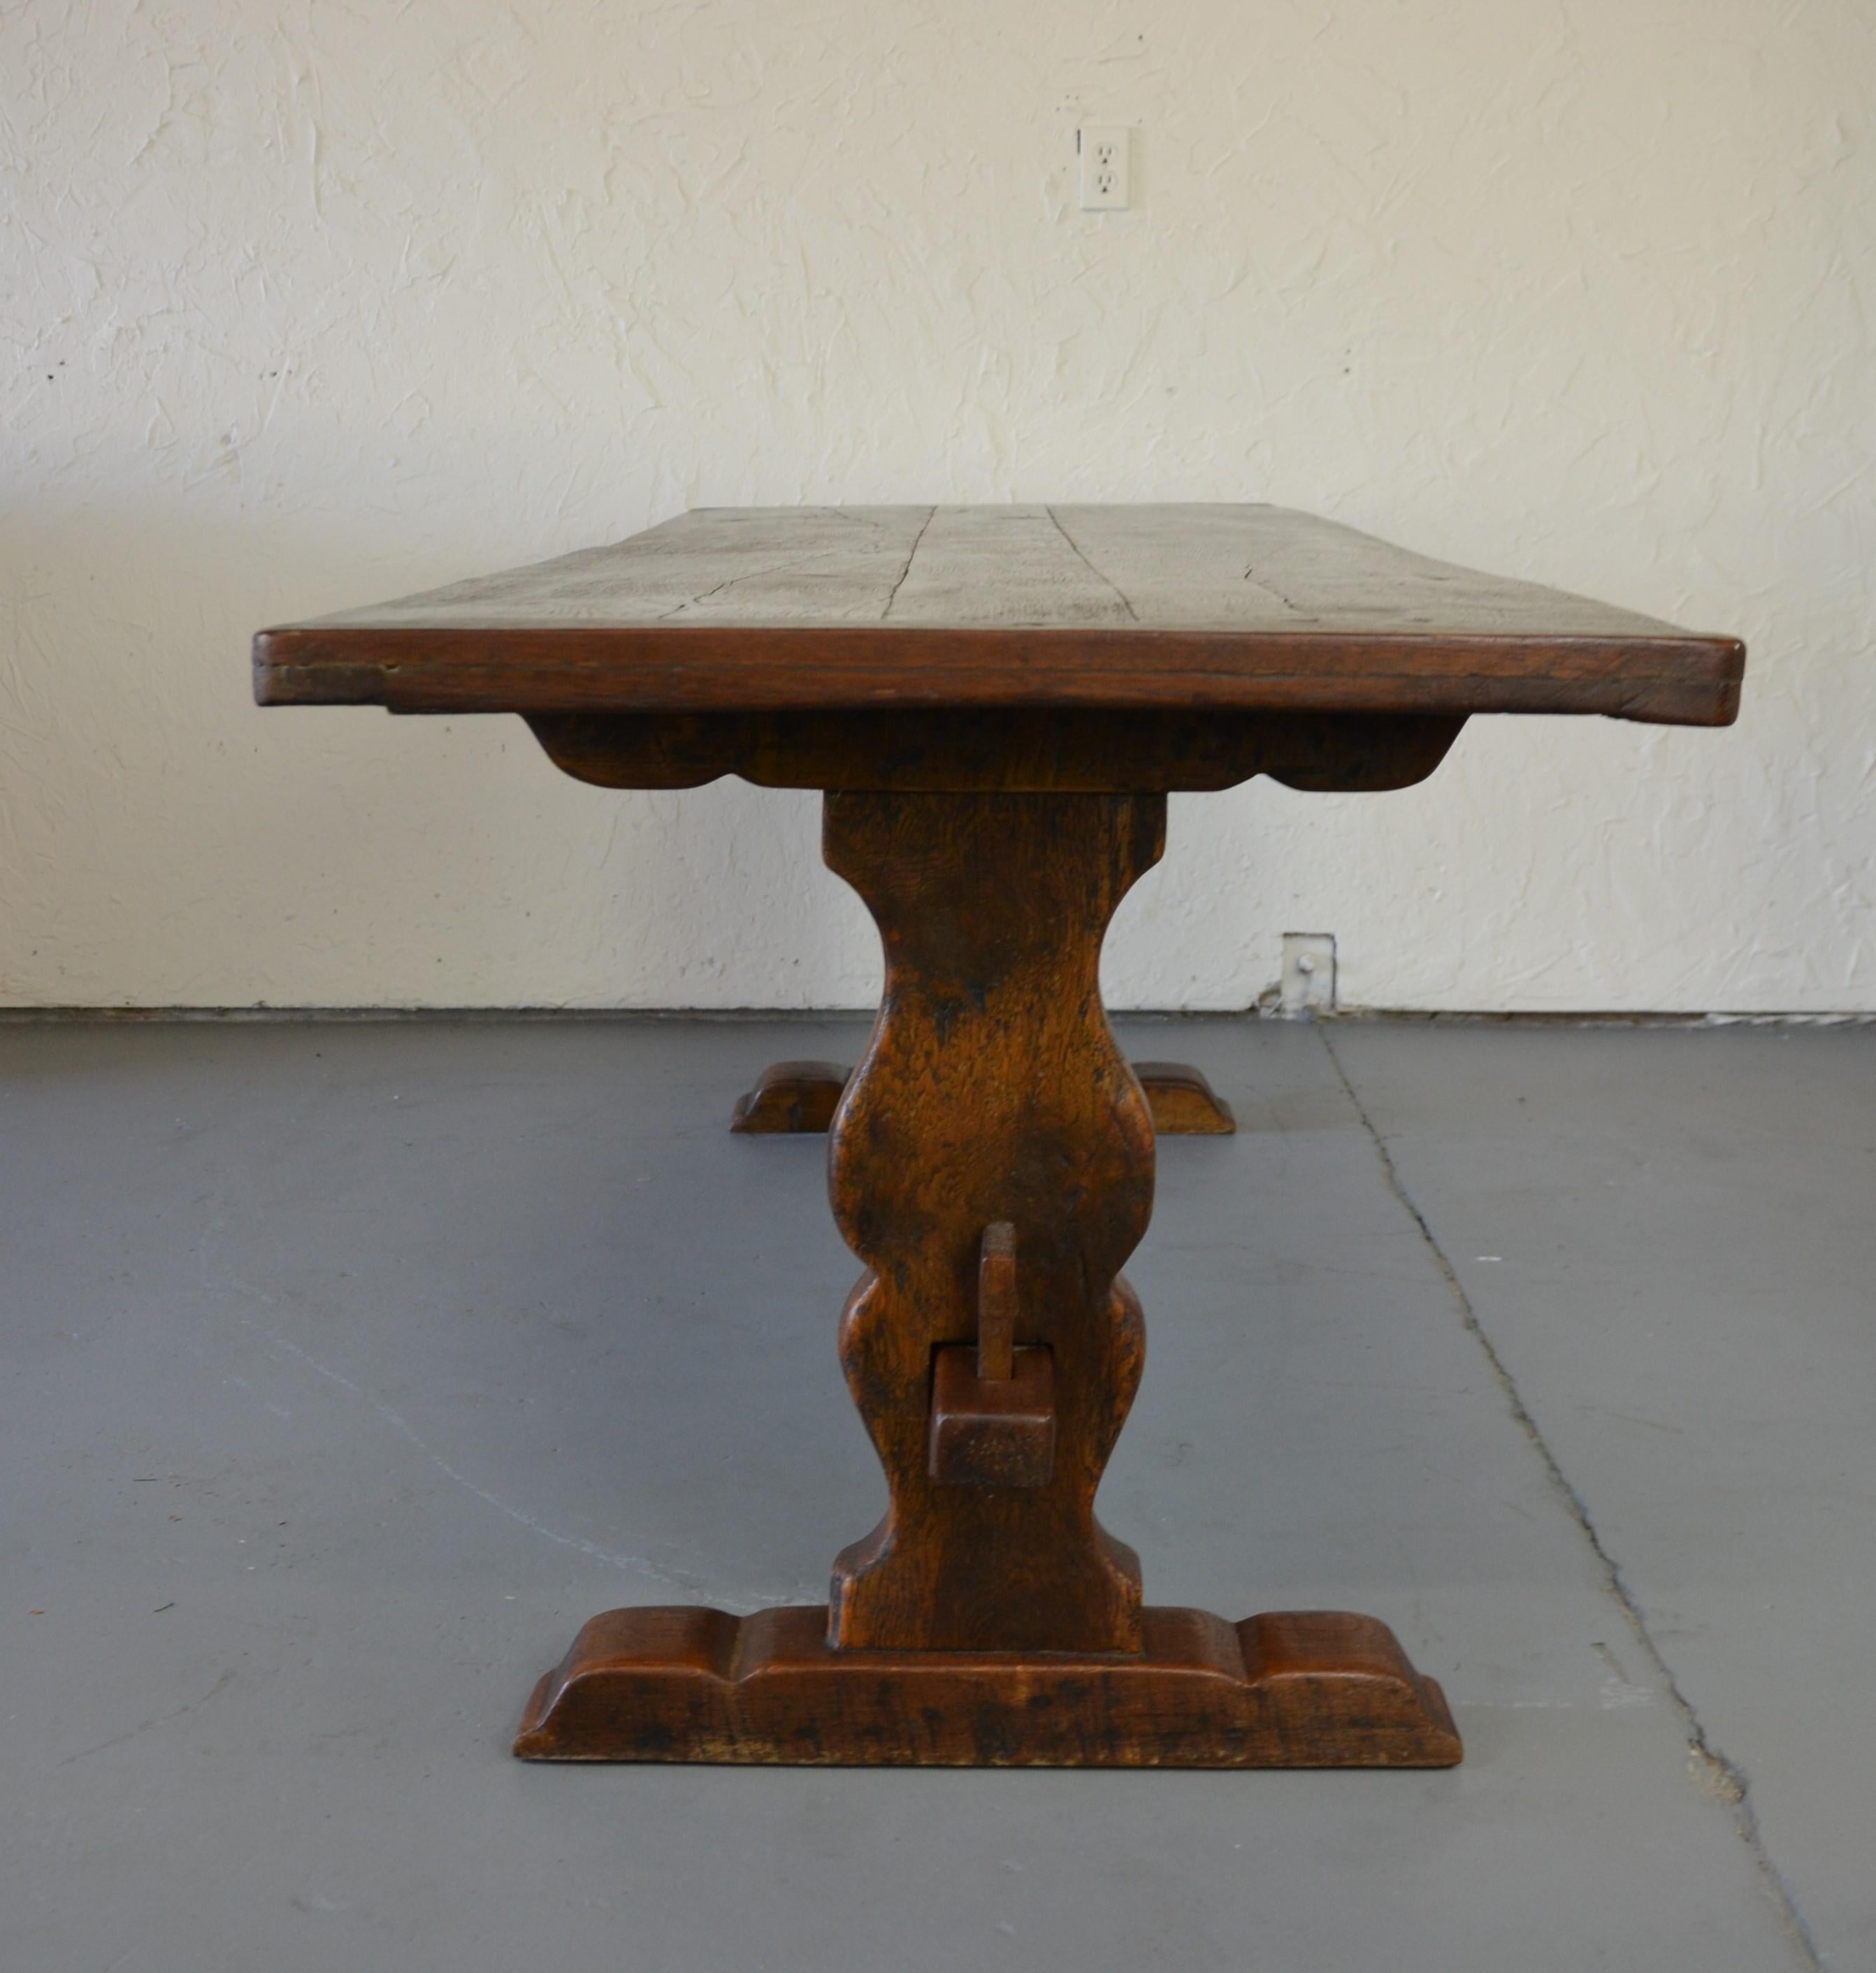 English c1720 Refectory Table in the 